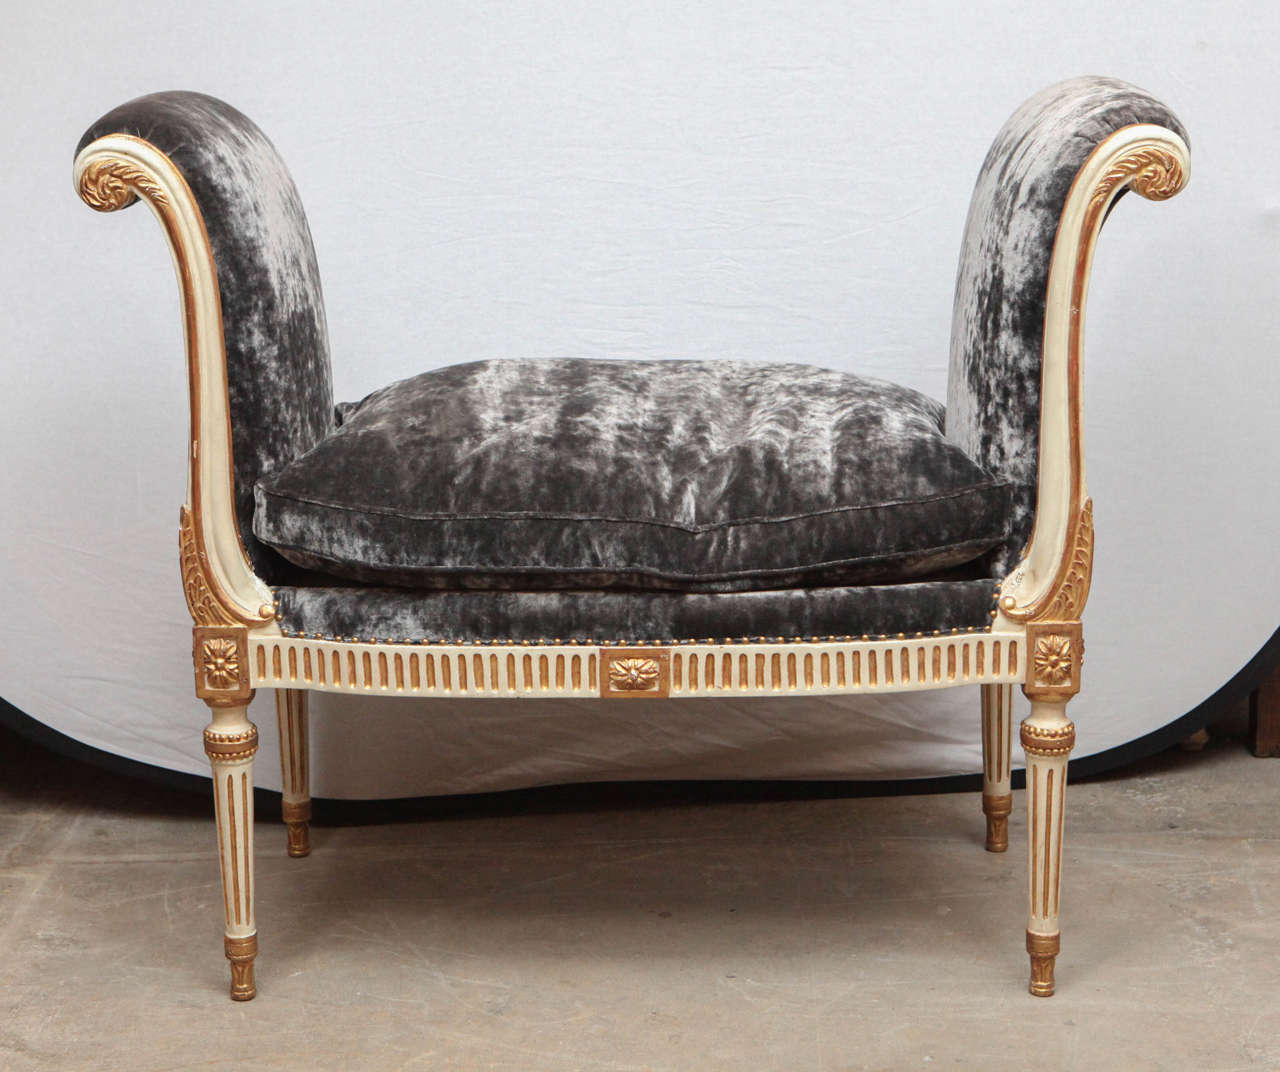 Italian Giltwood and Painted French Style Curled-Arm Bench